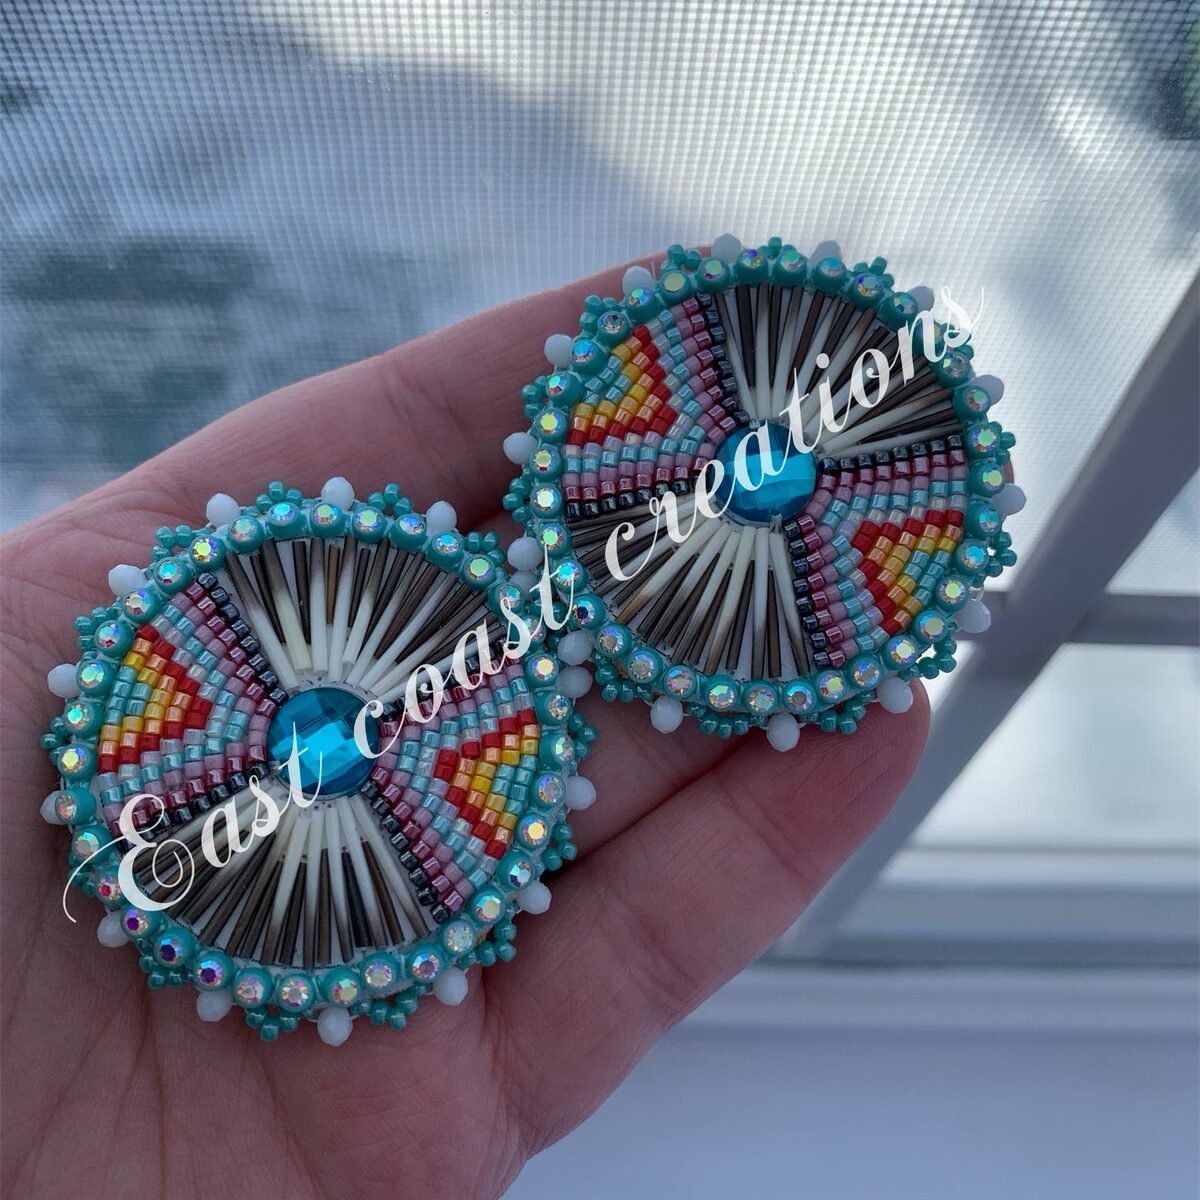 Kineta Snyder, Beadwork, leatherwork, quillwork, Jewelry, moccasins, Indigenous Artist, First Nations, Indigenous Arts Collective of Canada, Pass The Feather